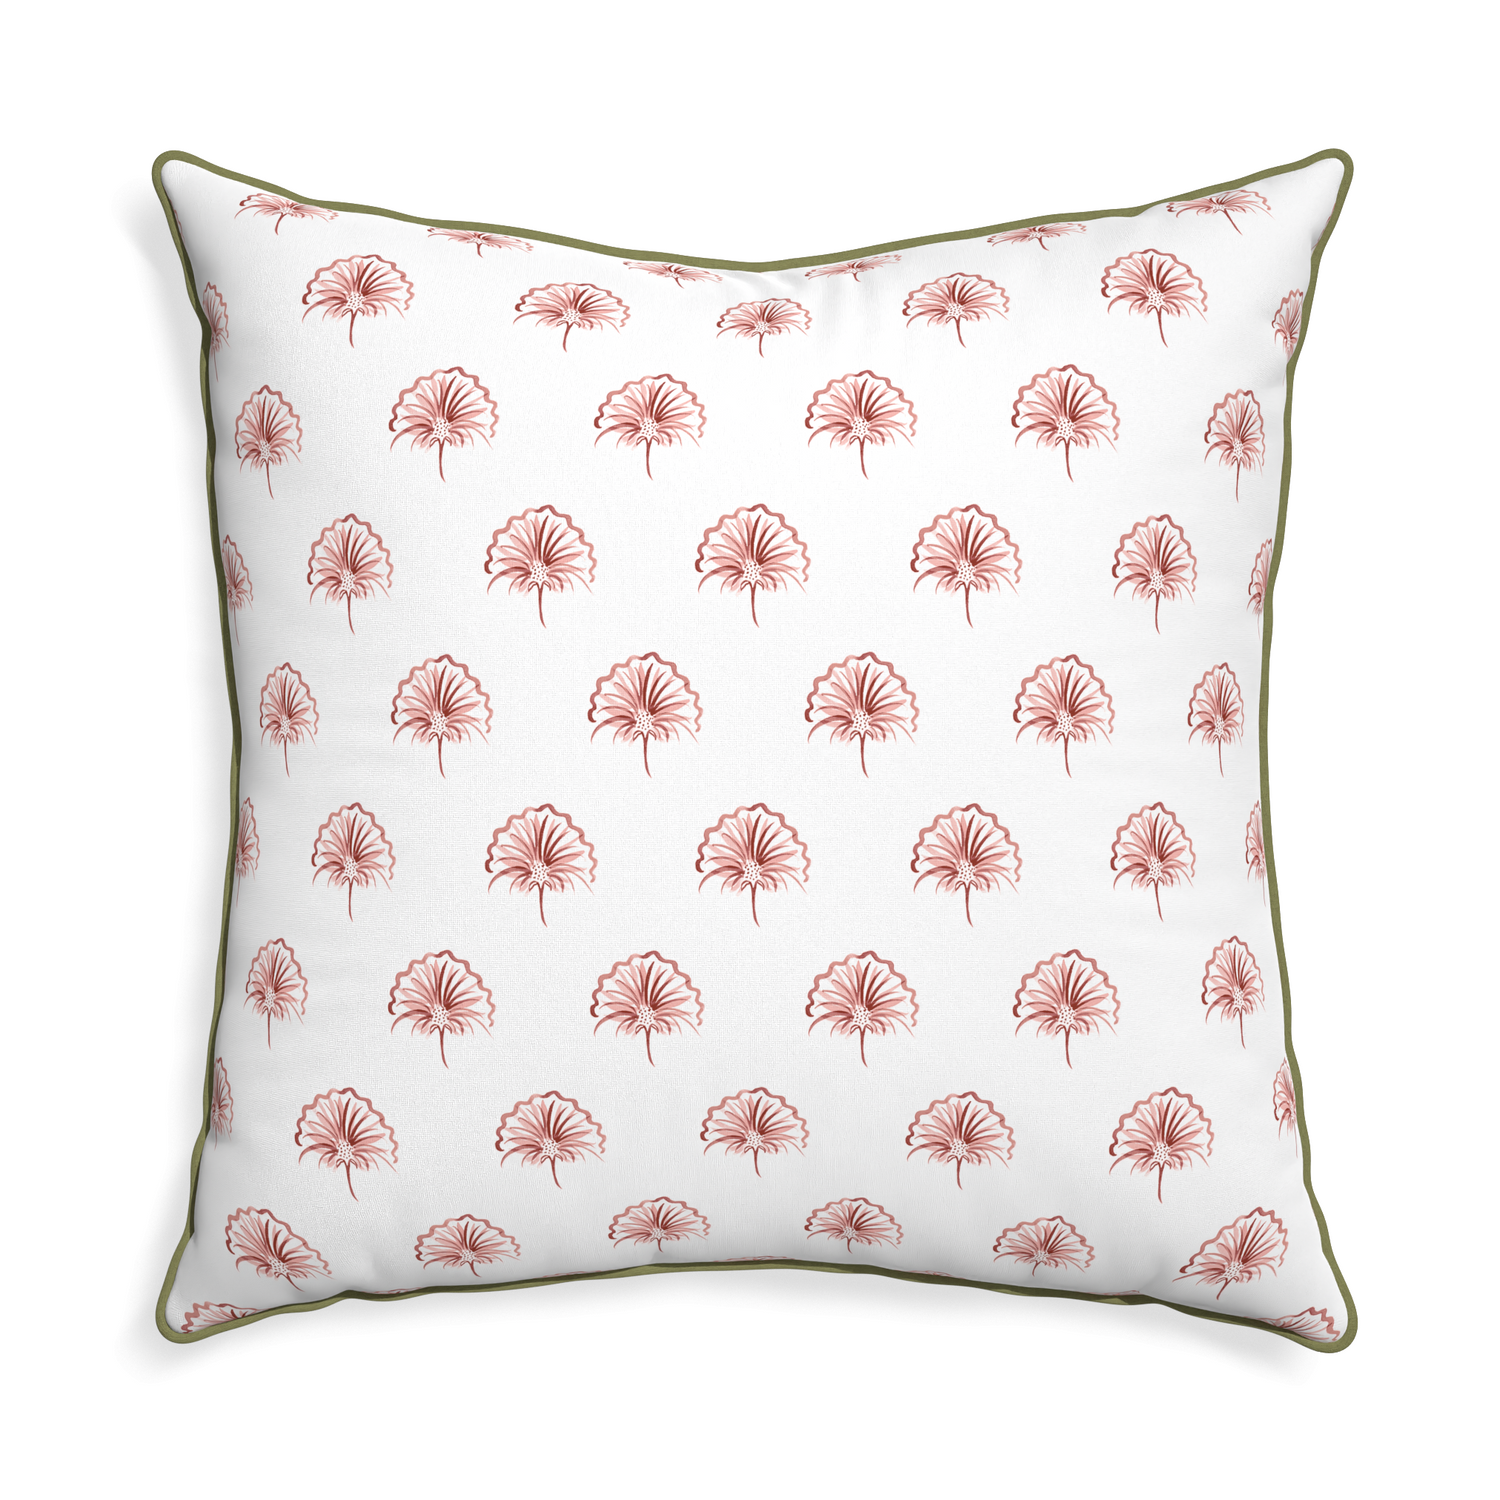 Euro-sham penelope rose custom floral pinkpillow with moss piping on white background